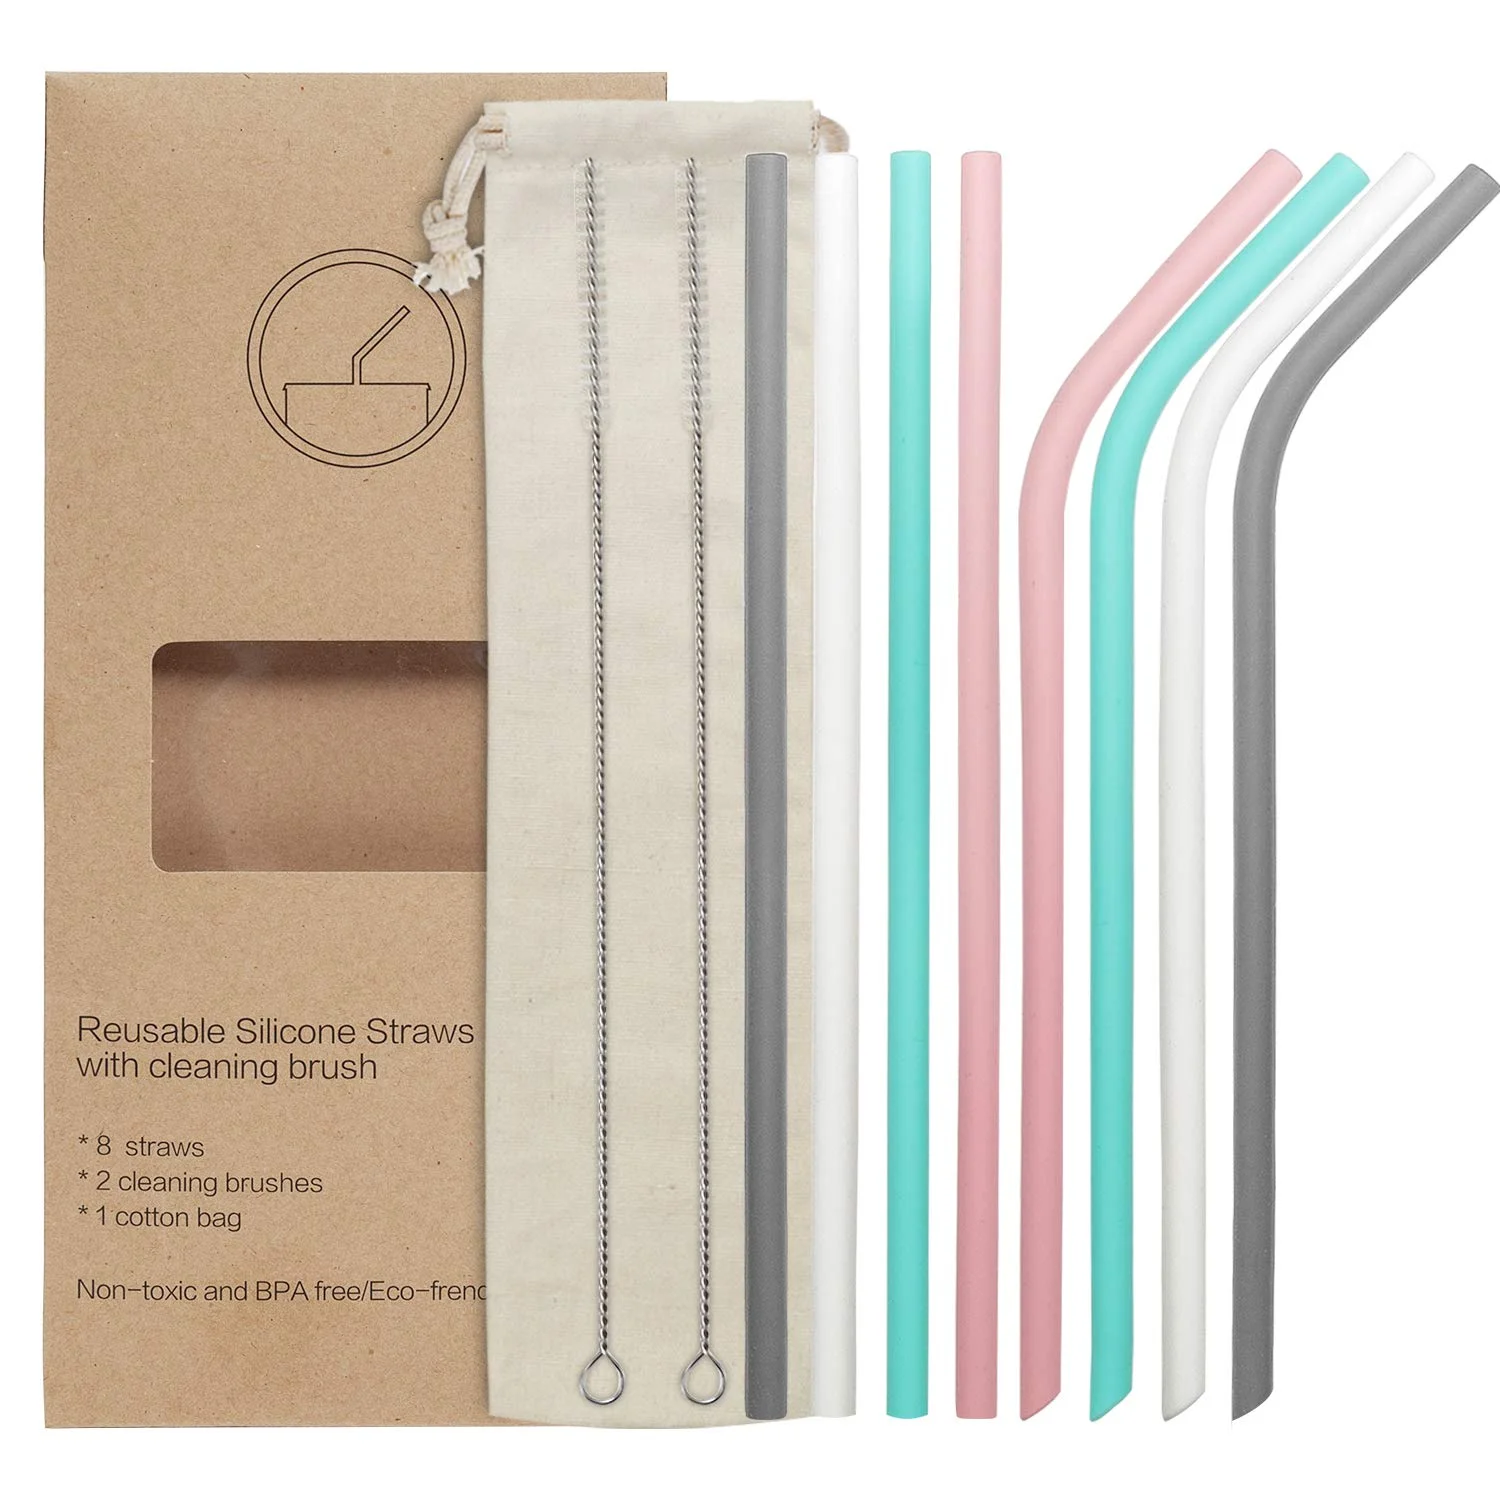 Eco-Friend Reusable Straw Flexible Drinking Silicone Straw With Case Set Cleaning Brush Tip